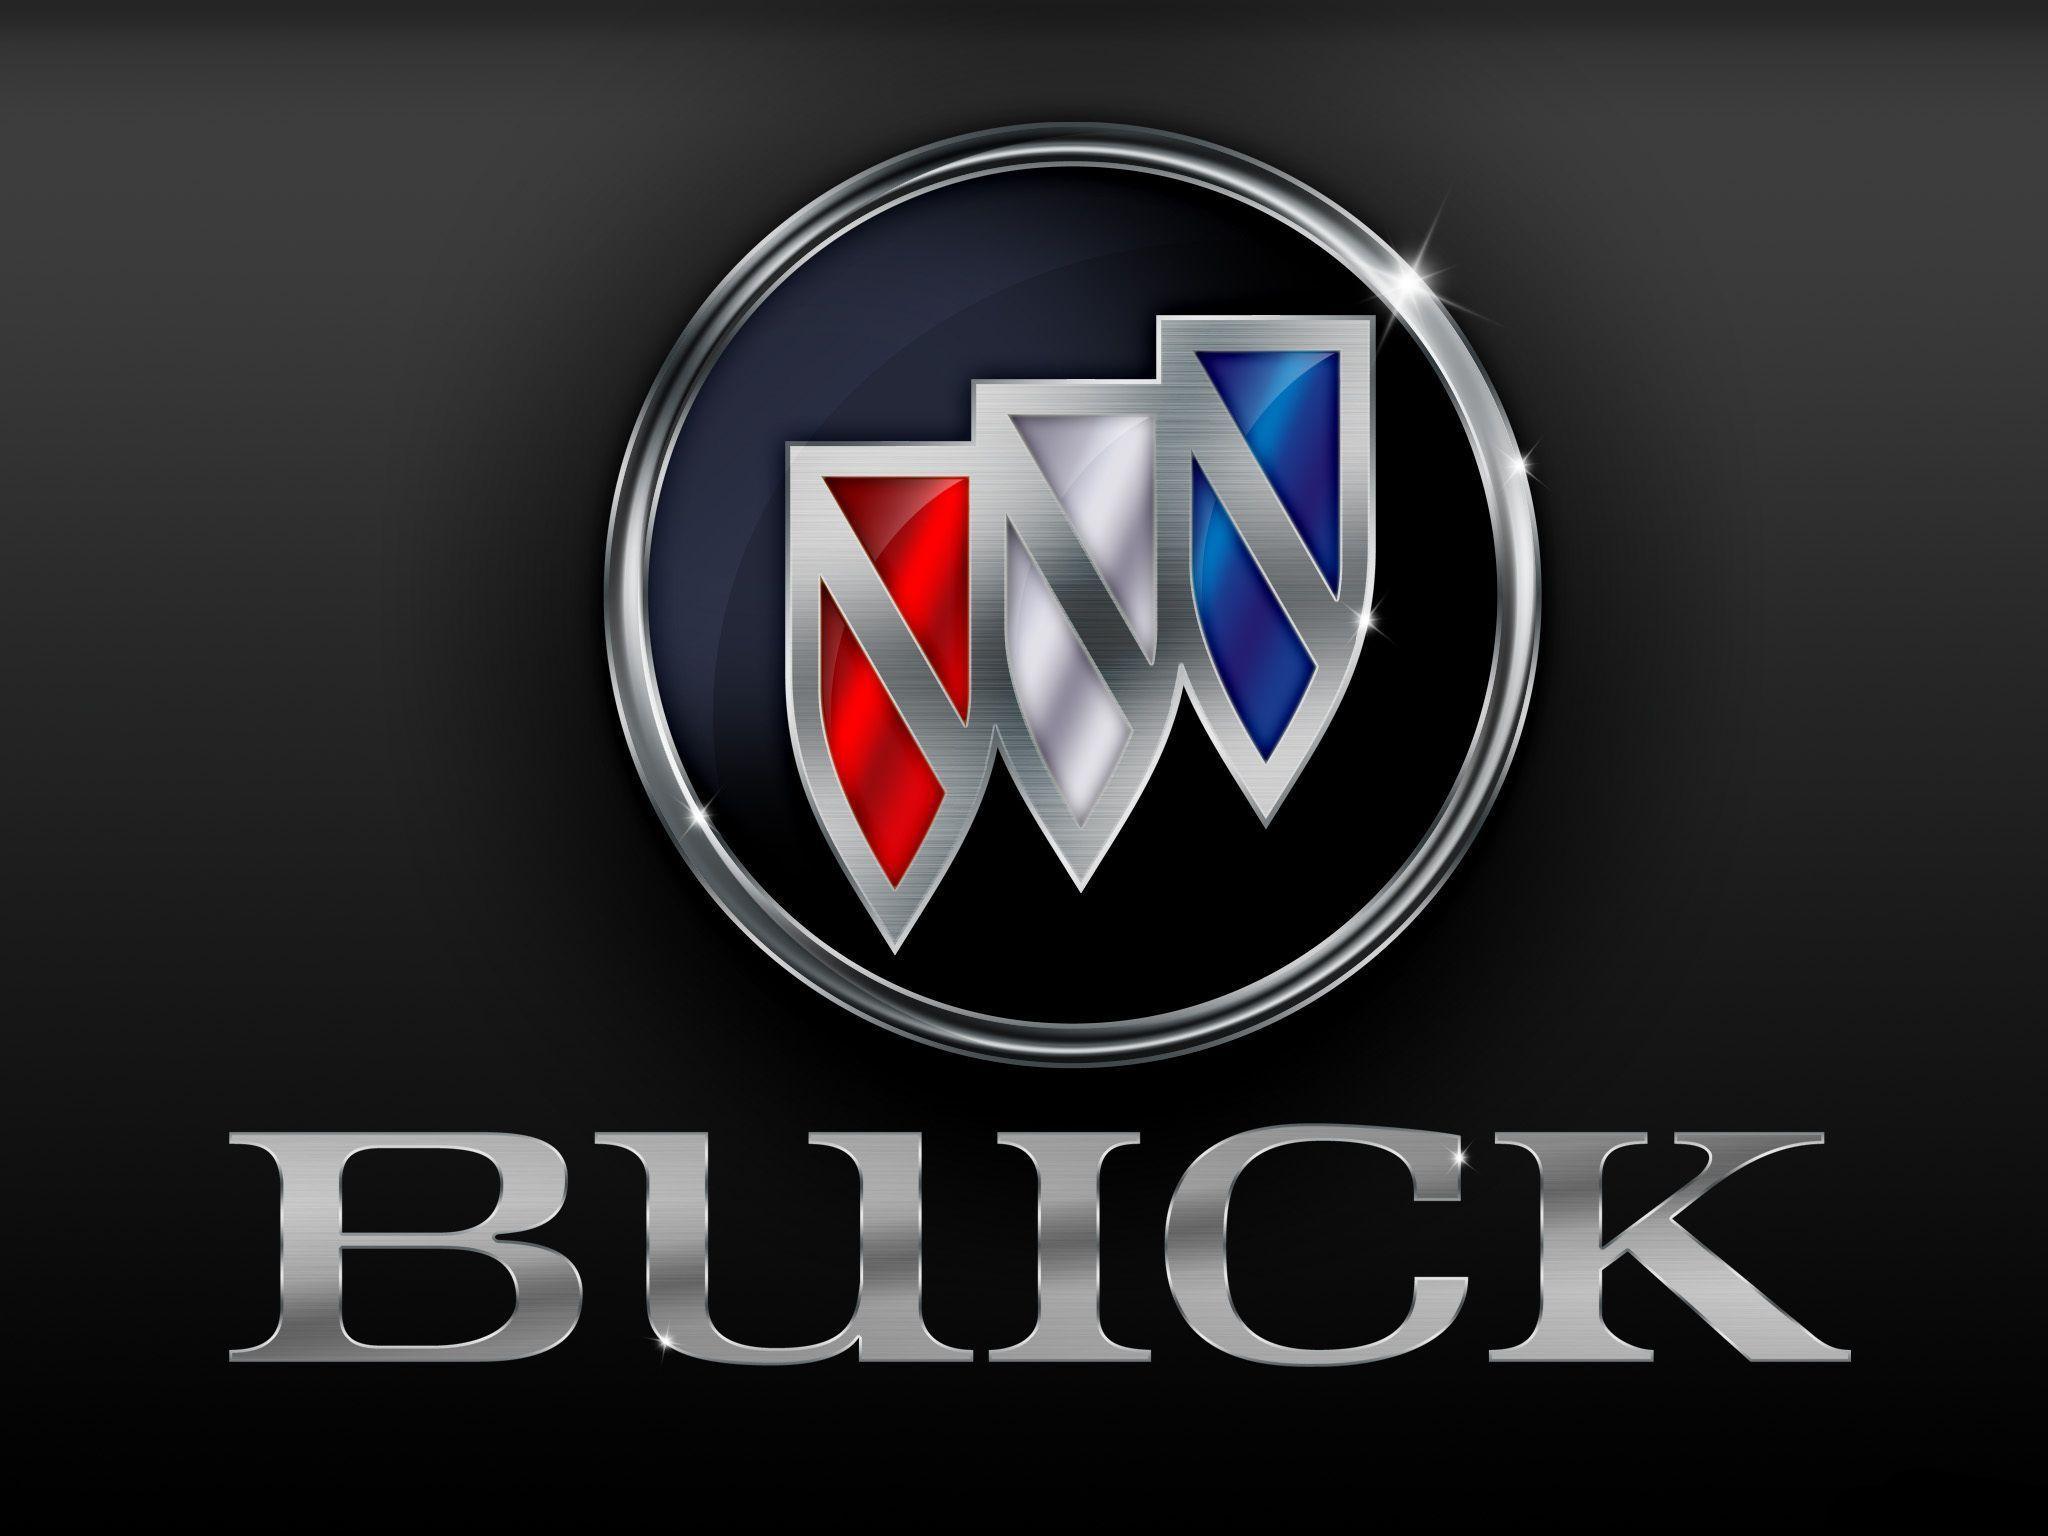 Antique Buick Logo - Buick Logo, Buick Car Symbol Meaning and History | Car Brand Names.com